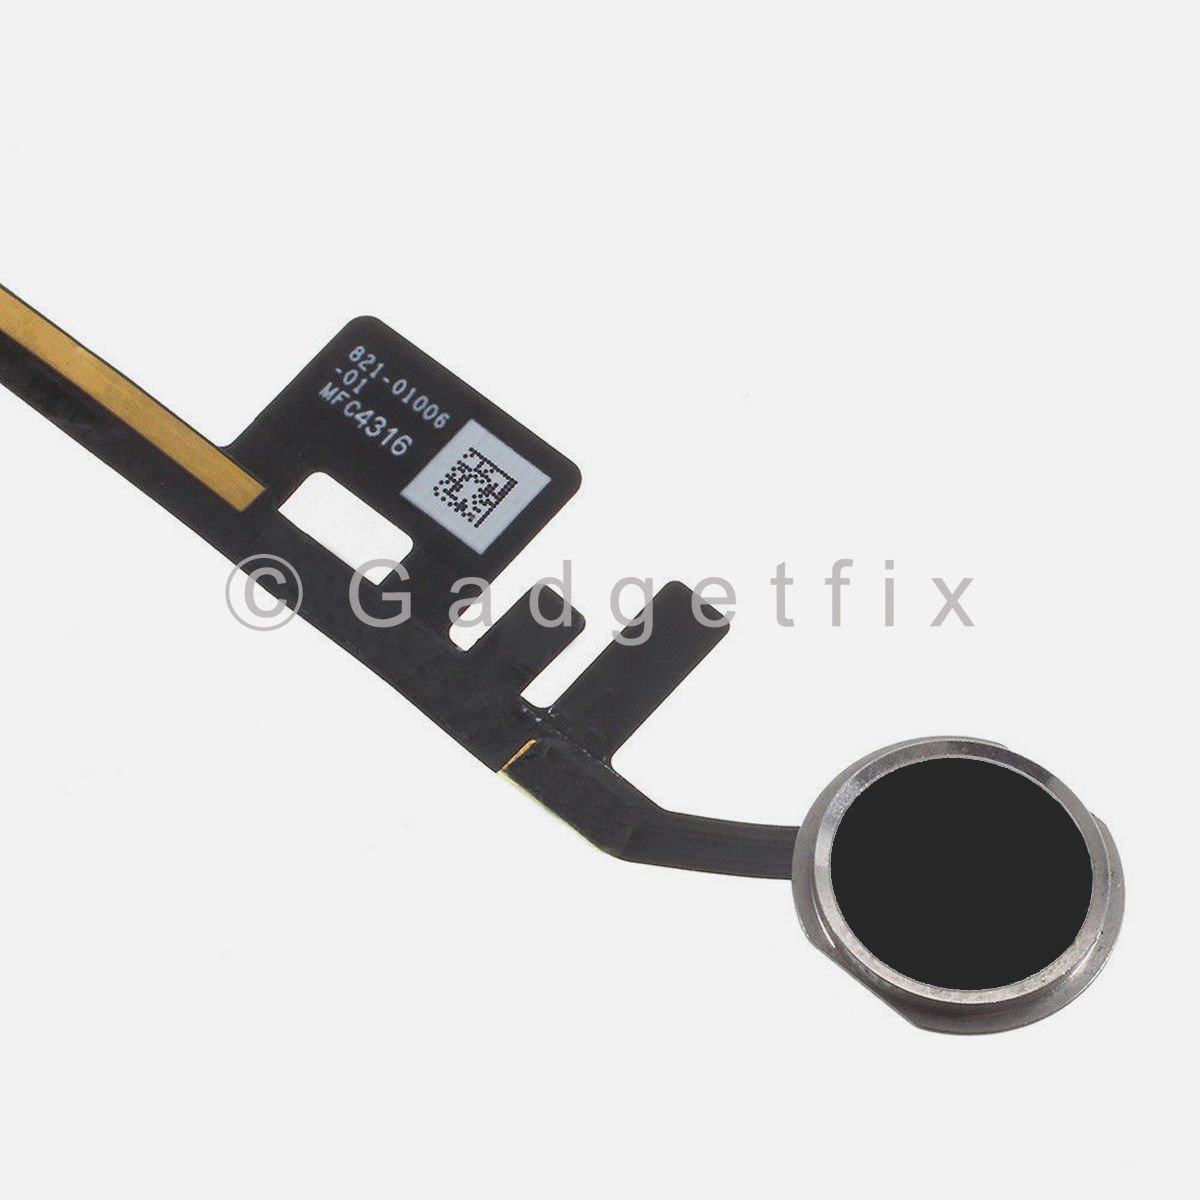 Black Home Button Key Flex Cable Connector For iPad 5th Gen 9.7" 2017 A1822 A1823